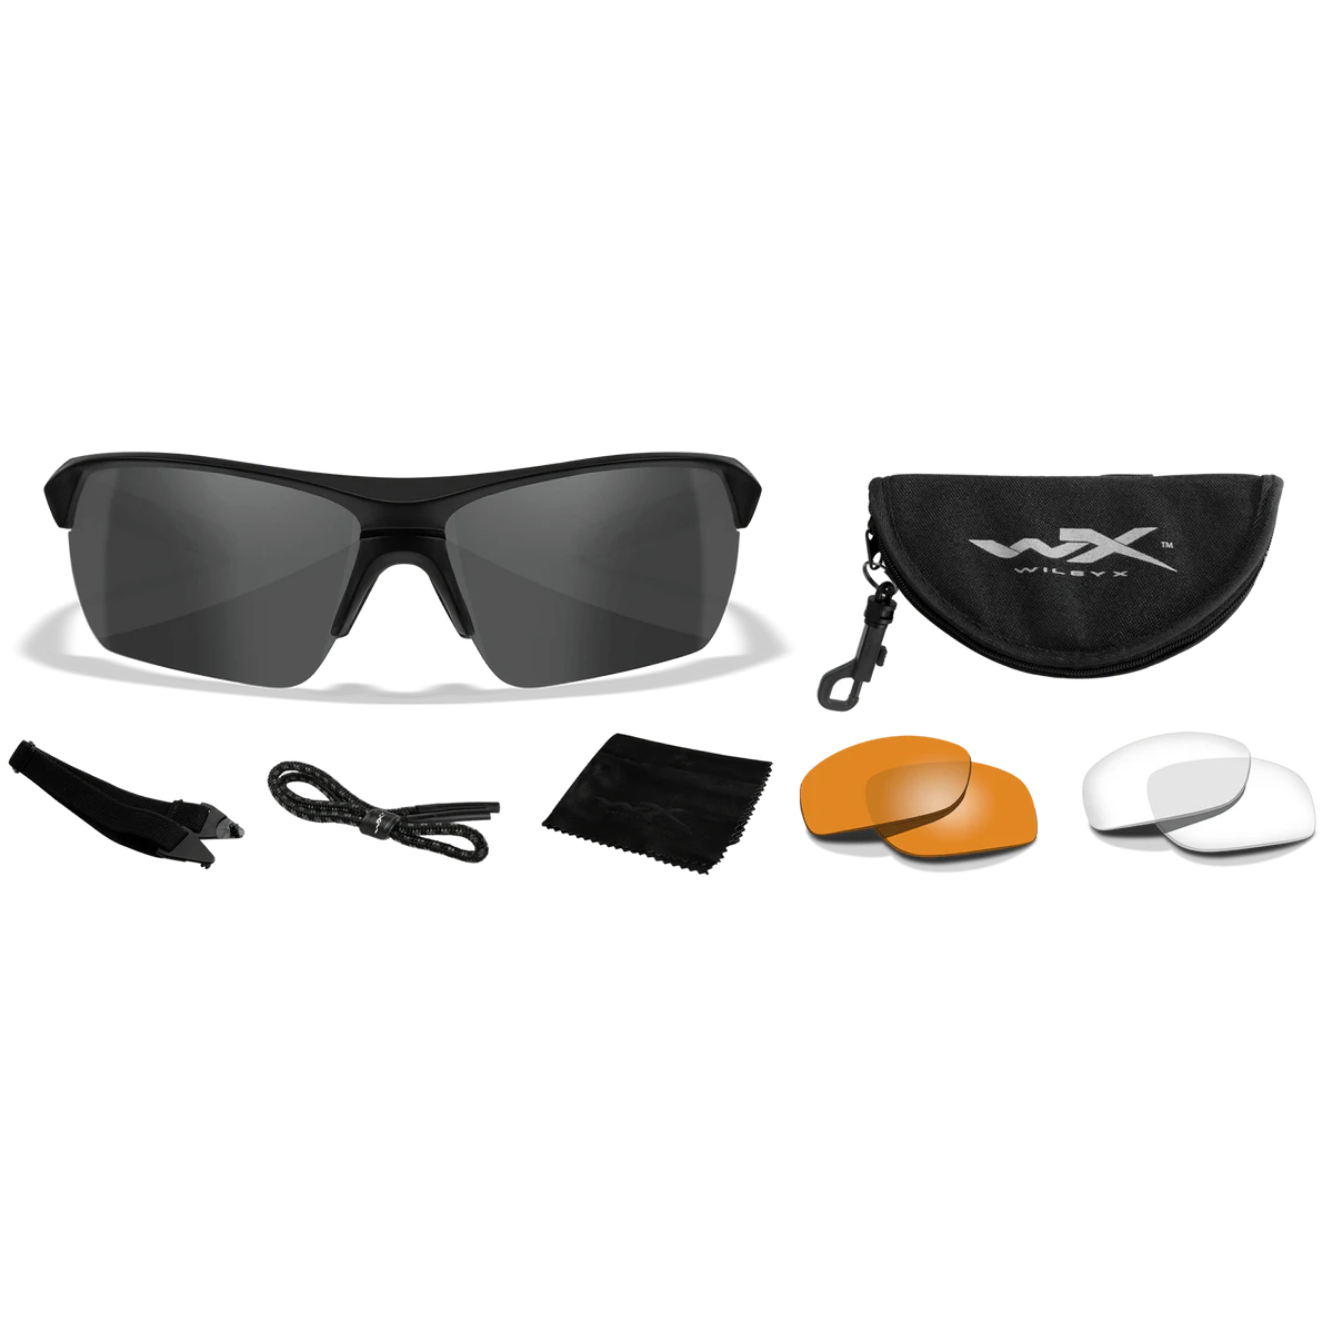 WileyX Guard Advanced 3 Lens Tactical Sunglasses Safety Glasses